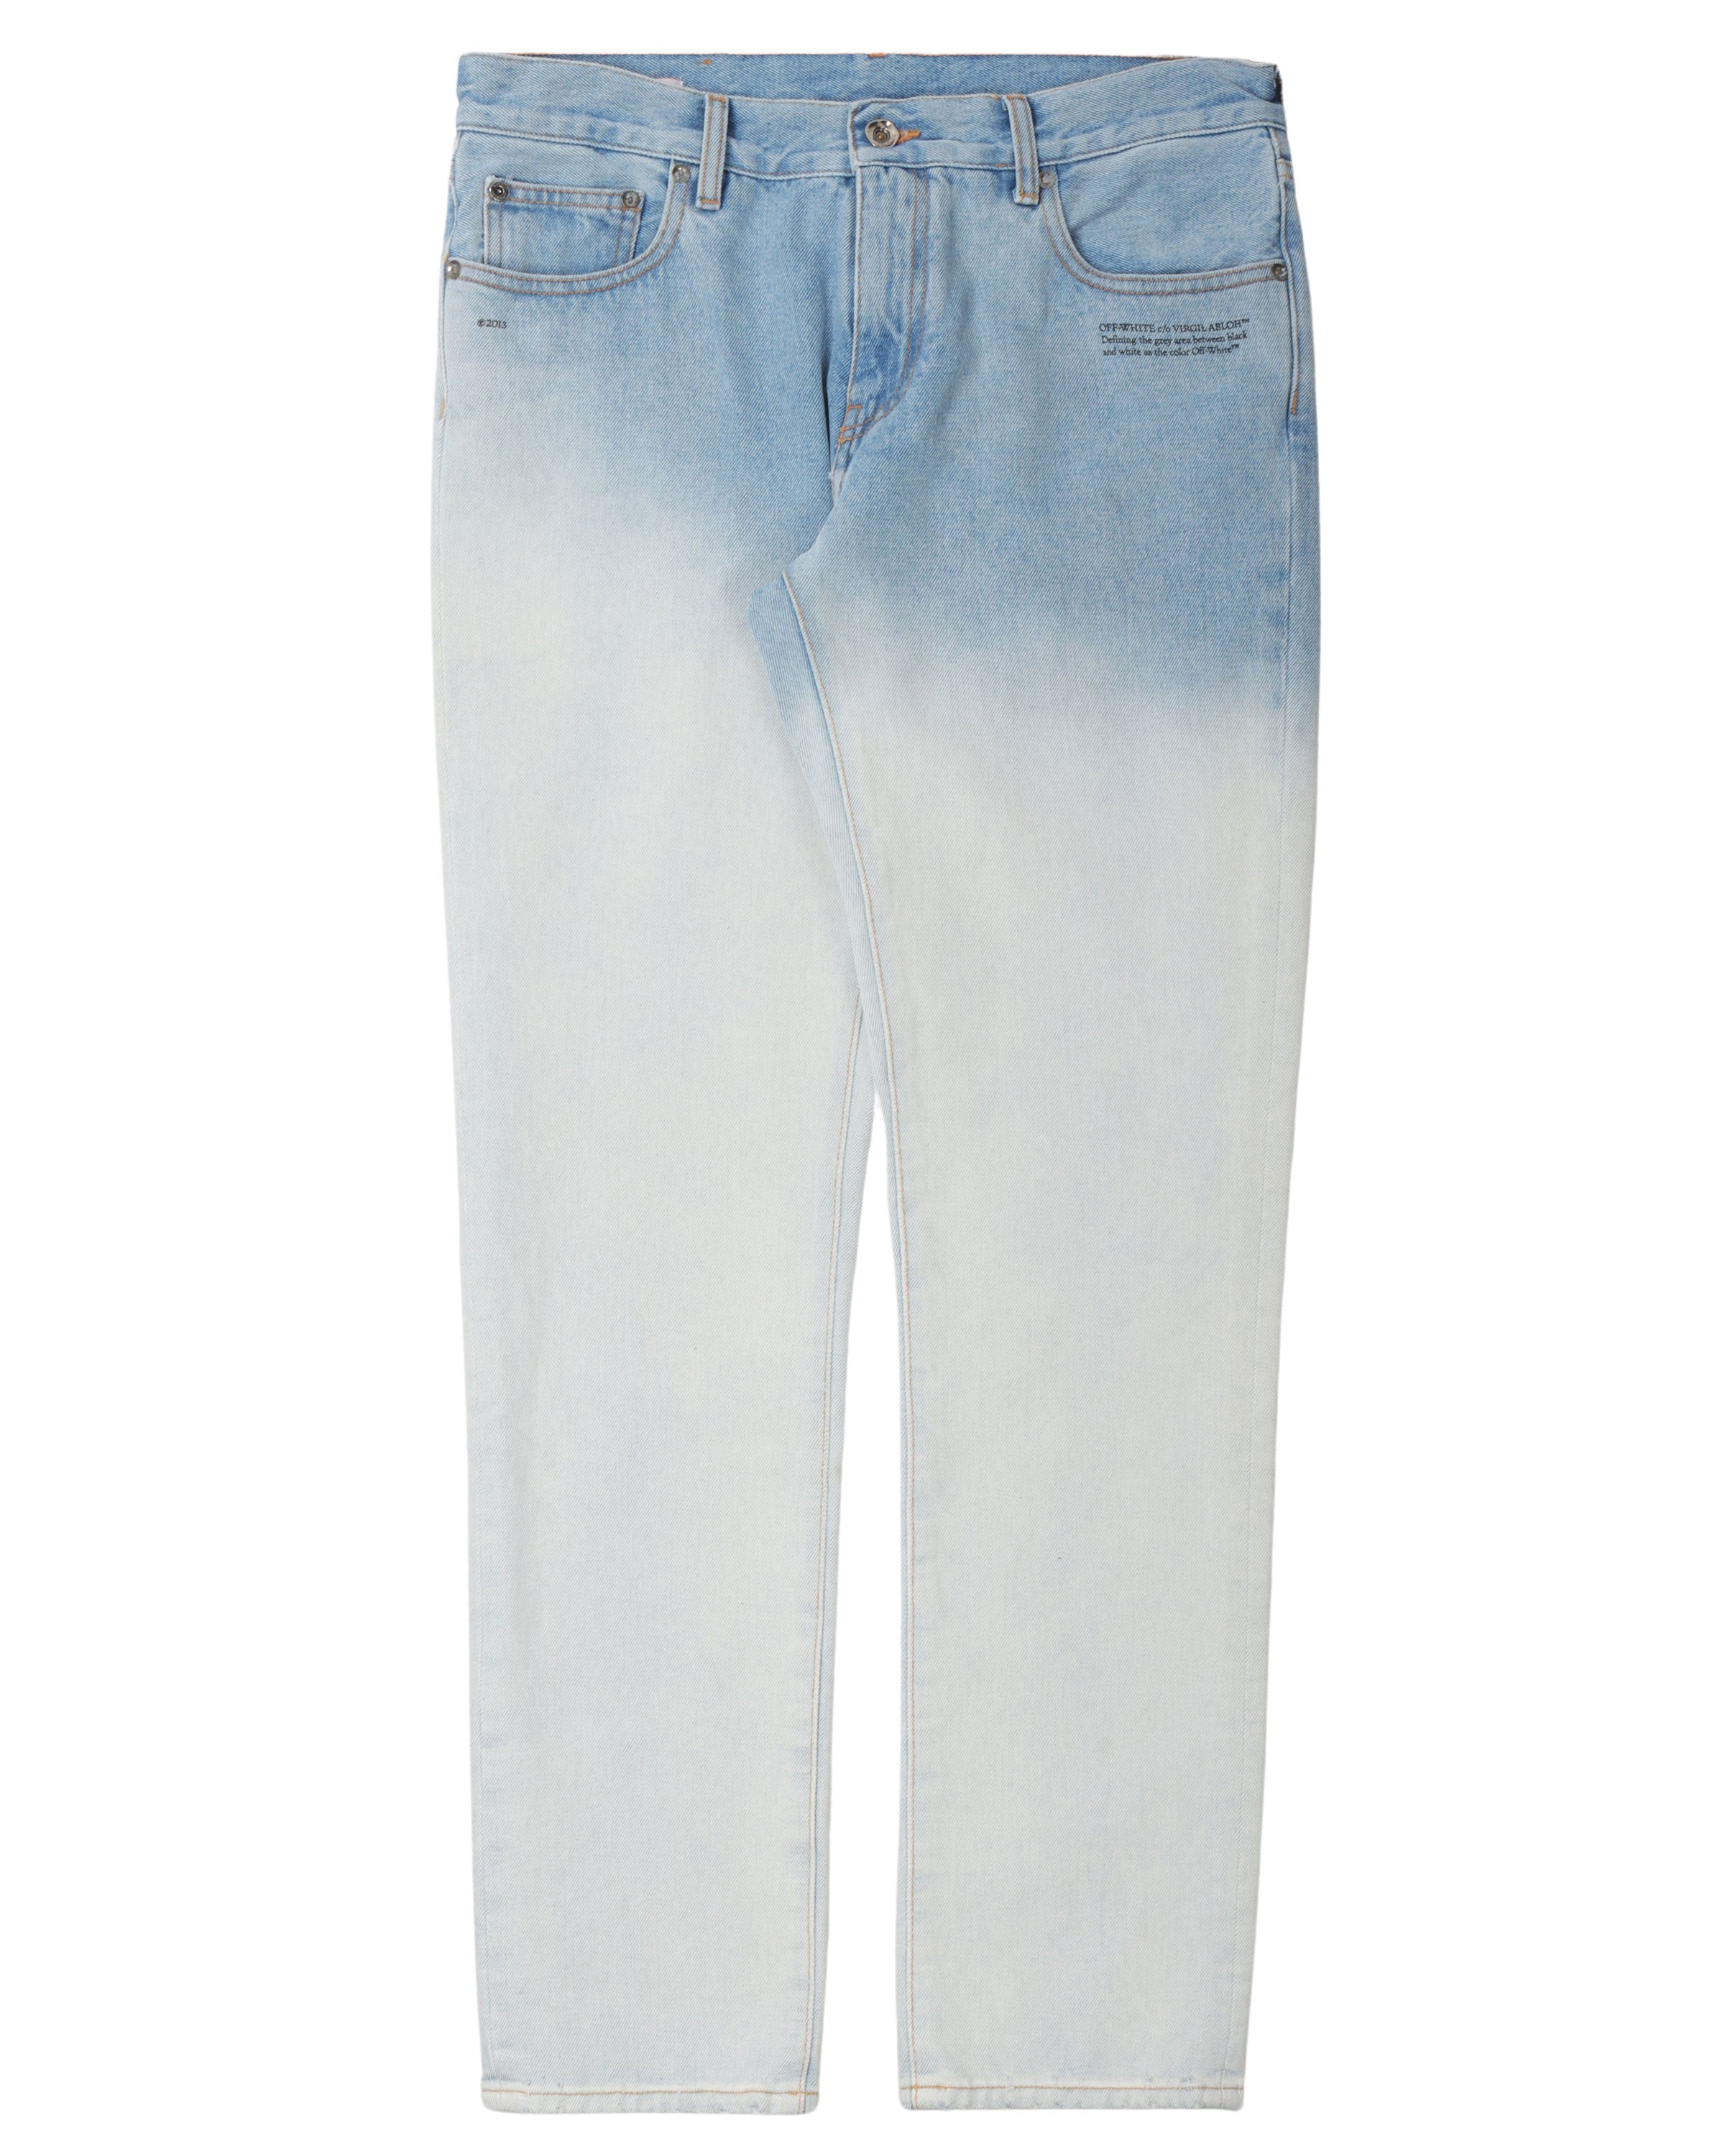 Off-White Gradient Jeans